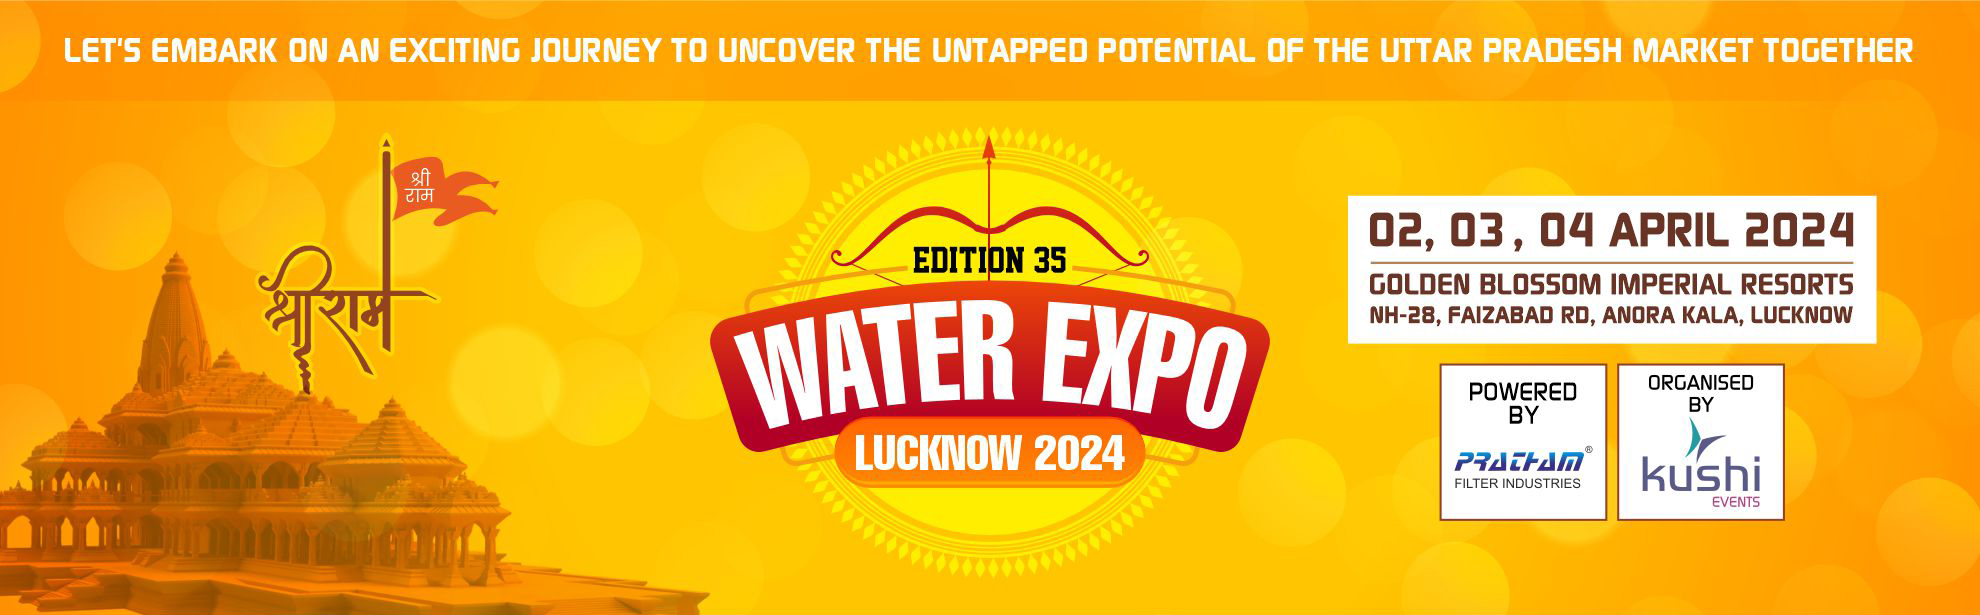 Water Expo Lucknow 2024